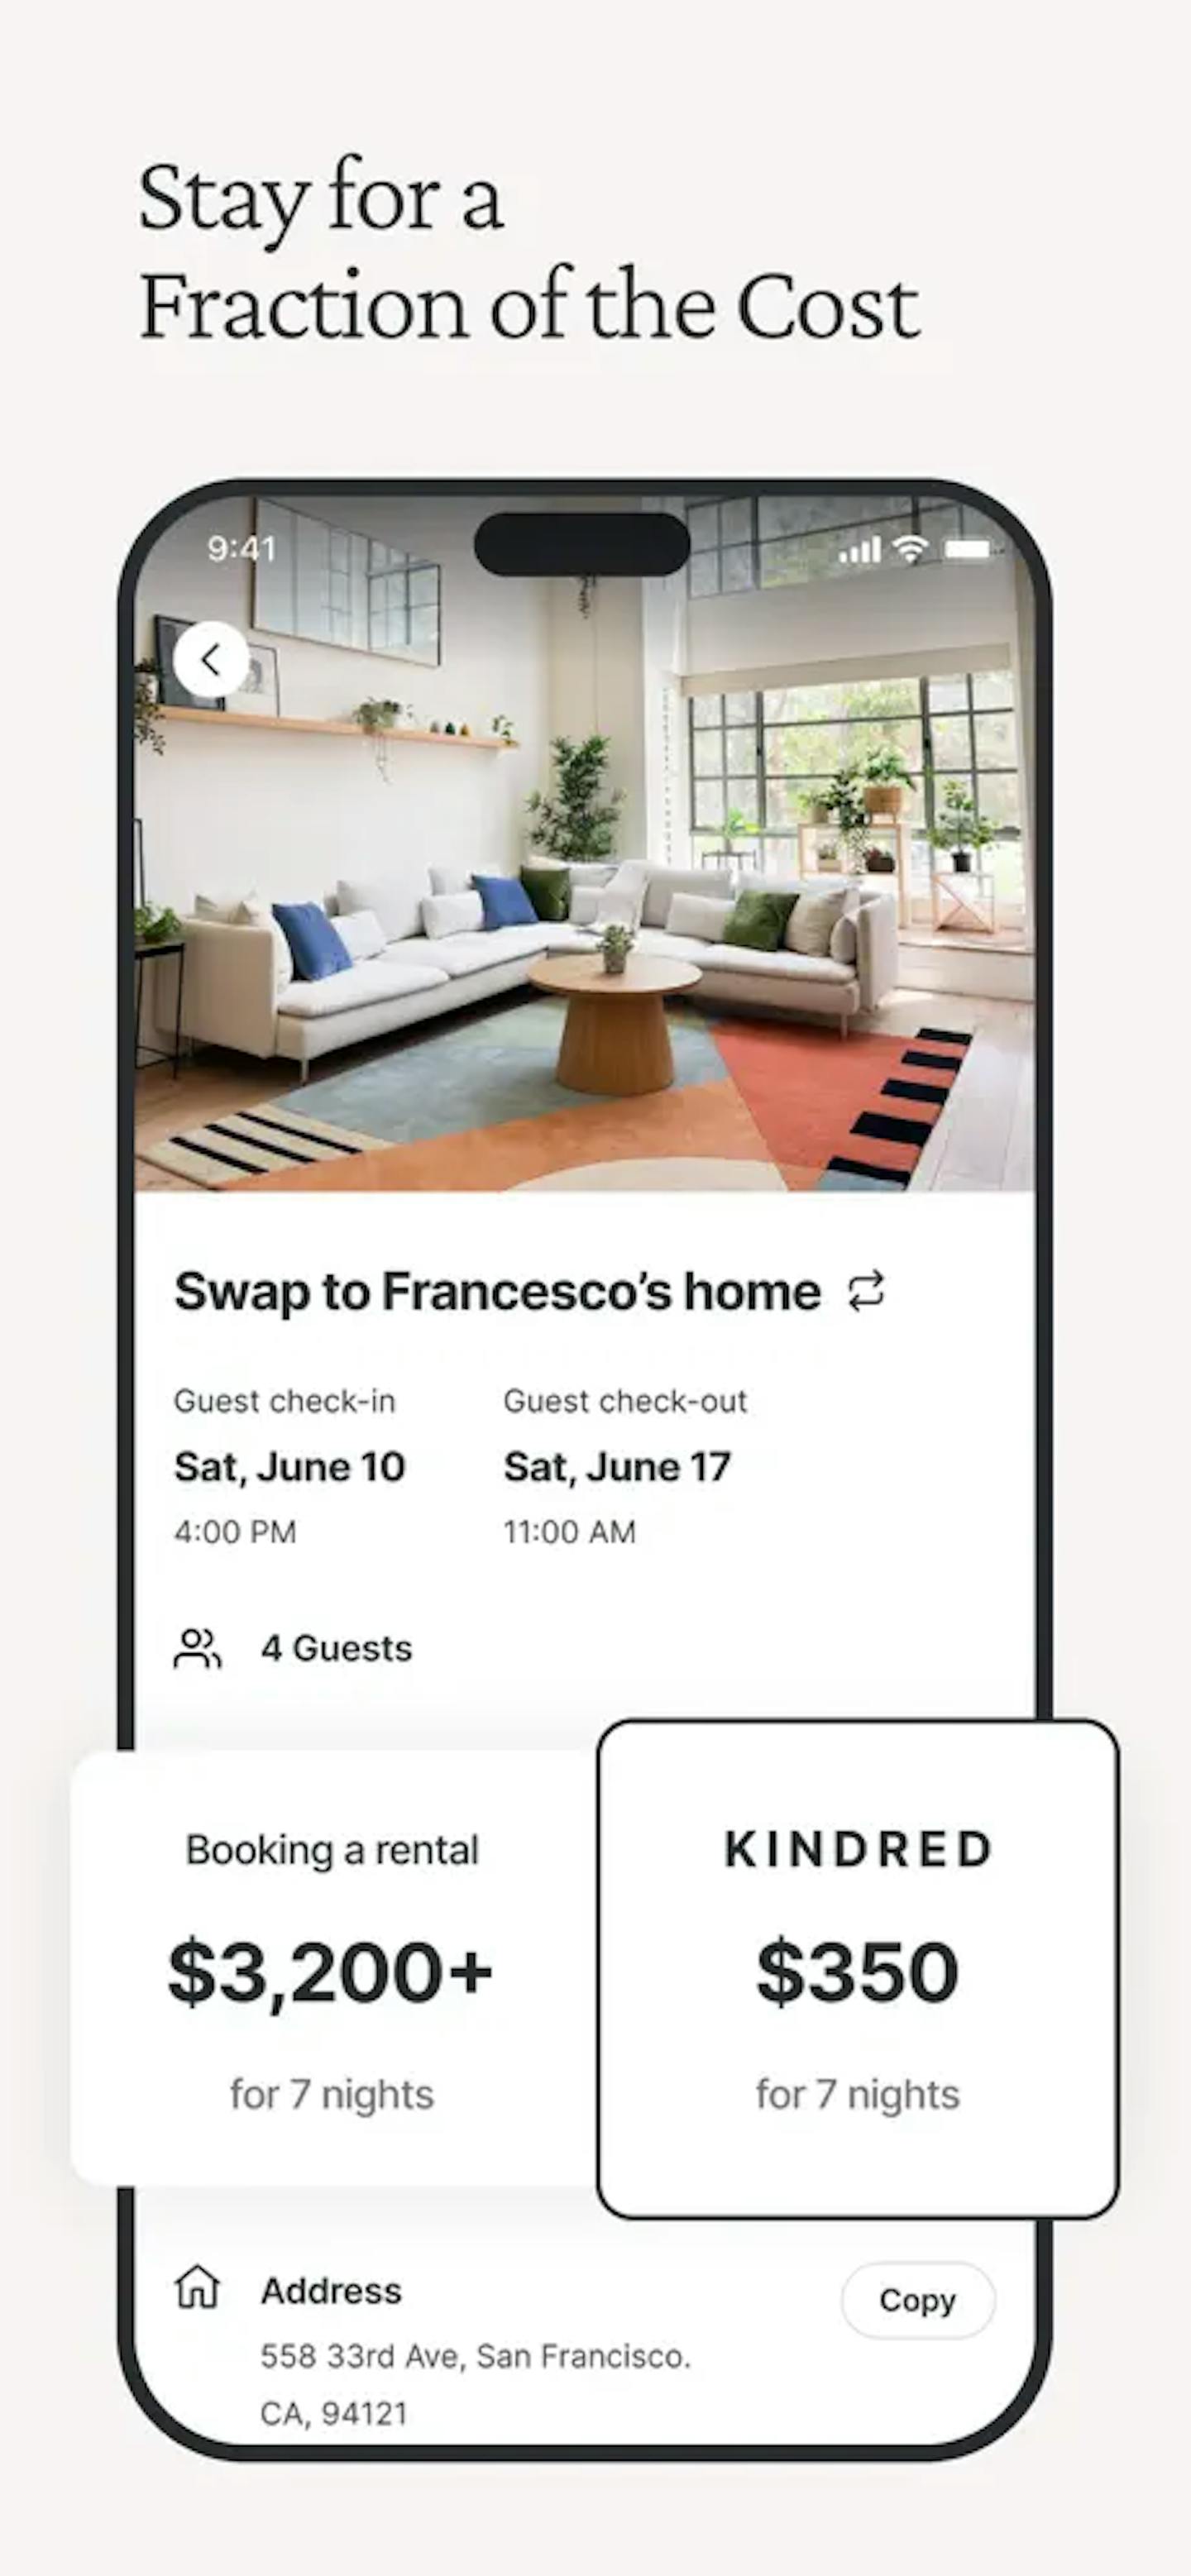 Affordable and sustainable travel with Kindred - Compare the cost of staying in a bright and modern living space for a fraction of traditional rental or hotel pricing.